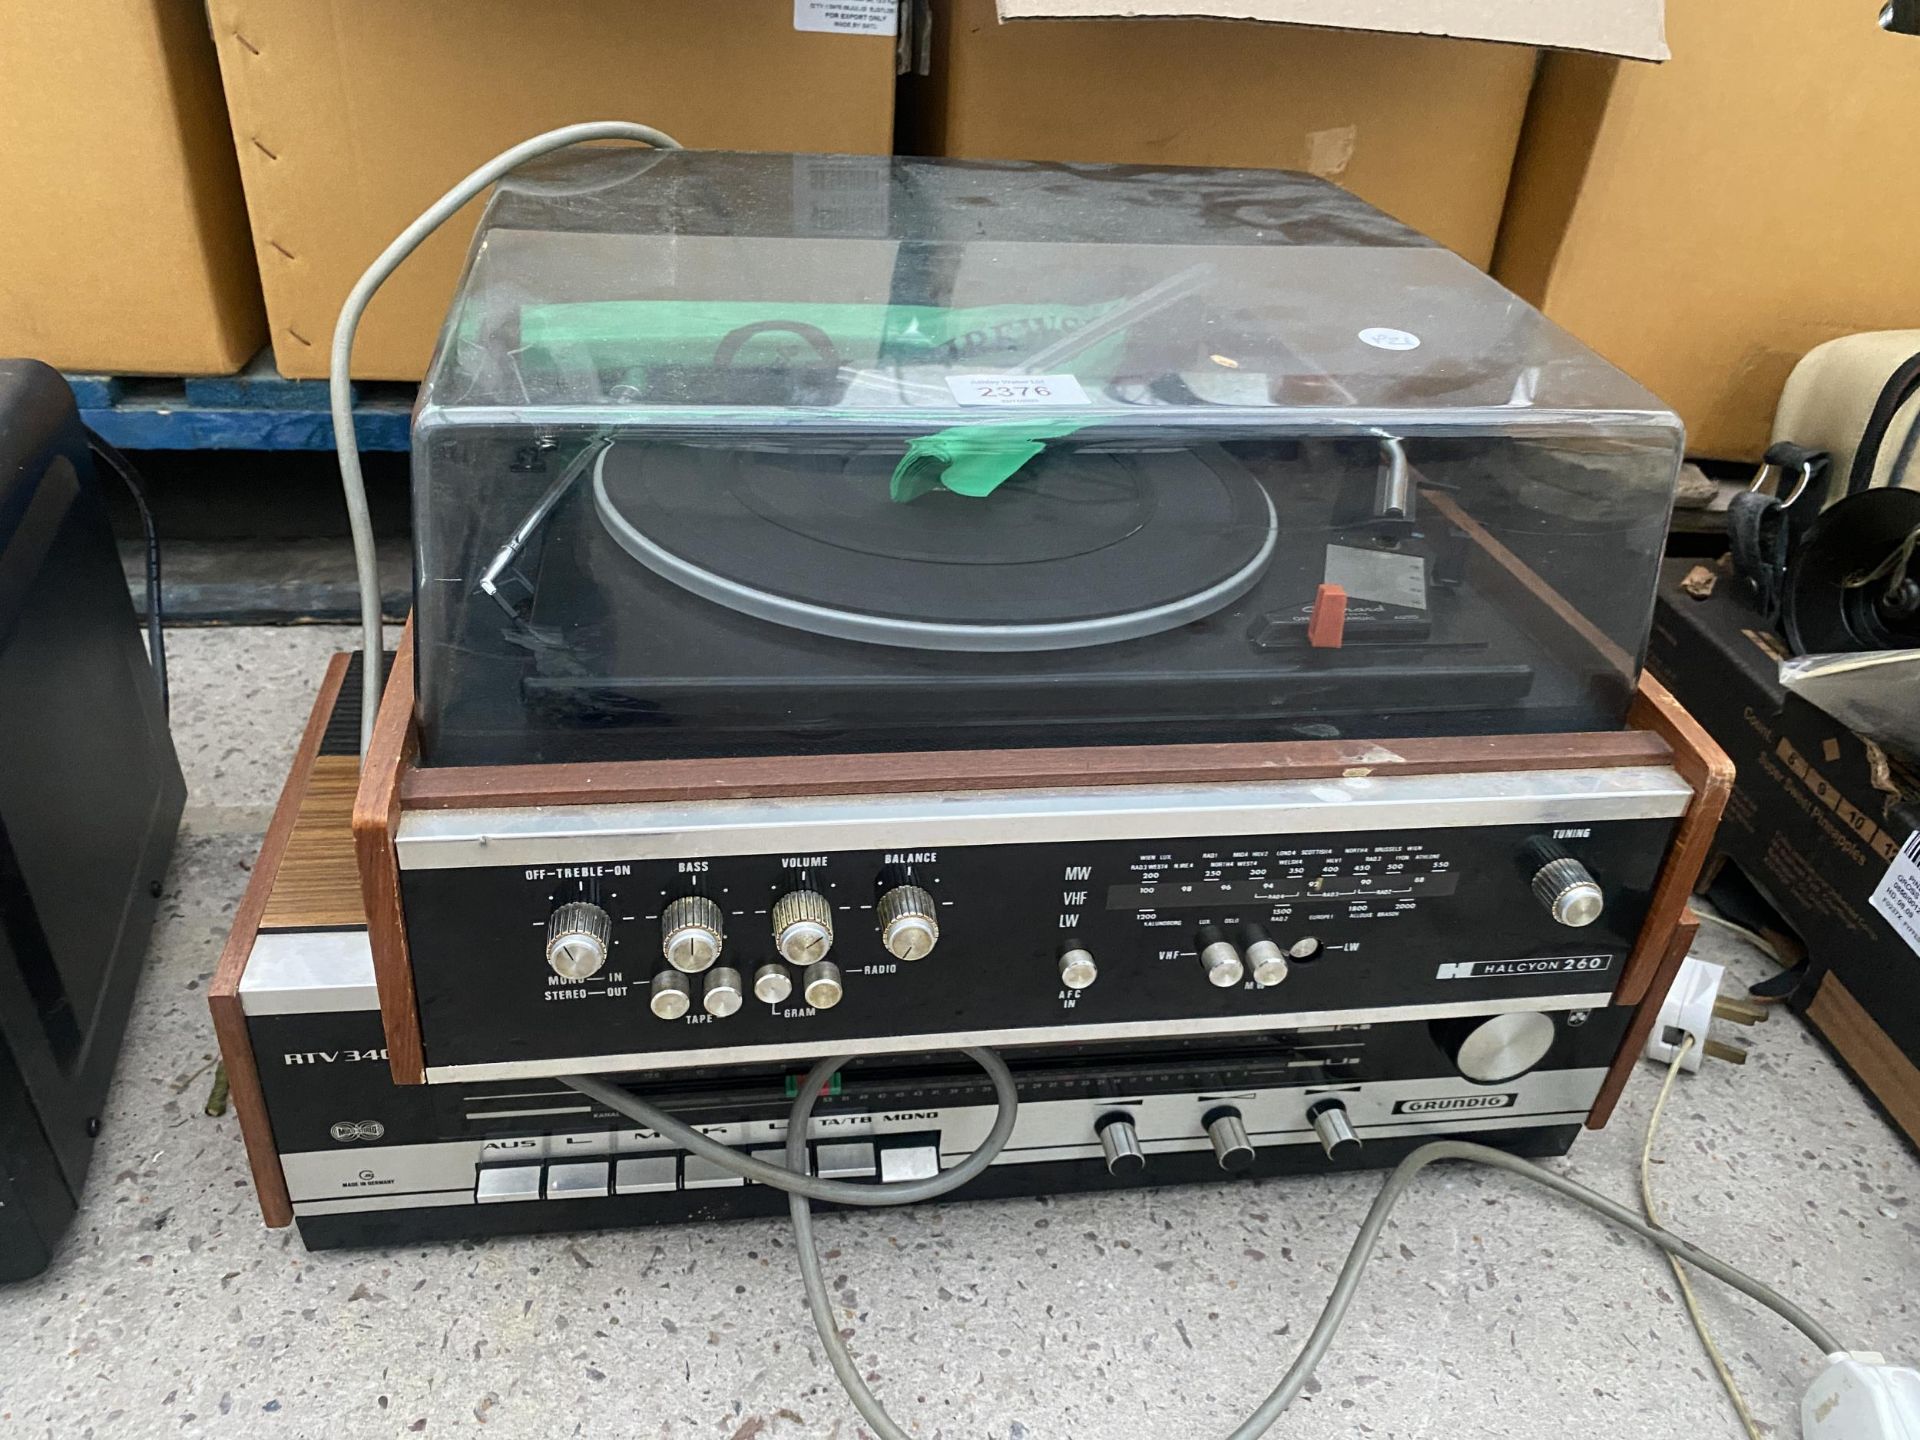 A GRUNDIG STEREO SYSTEM AND A HALCYON 260 RECORD PLAYER